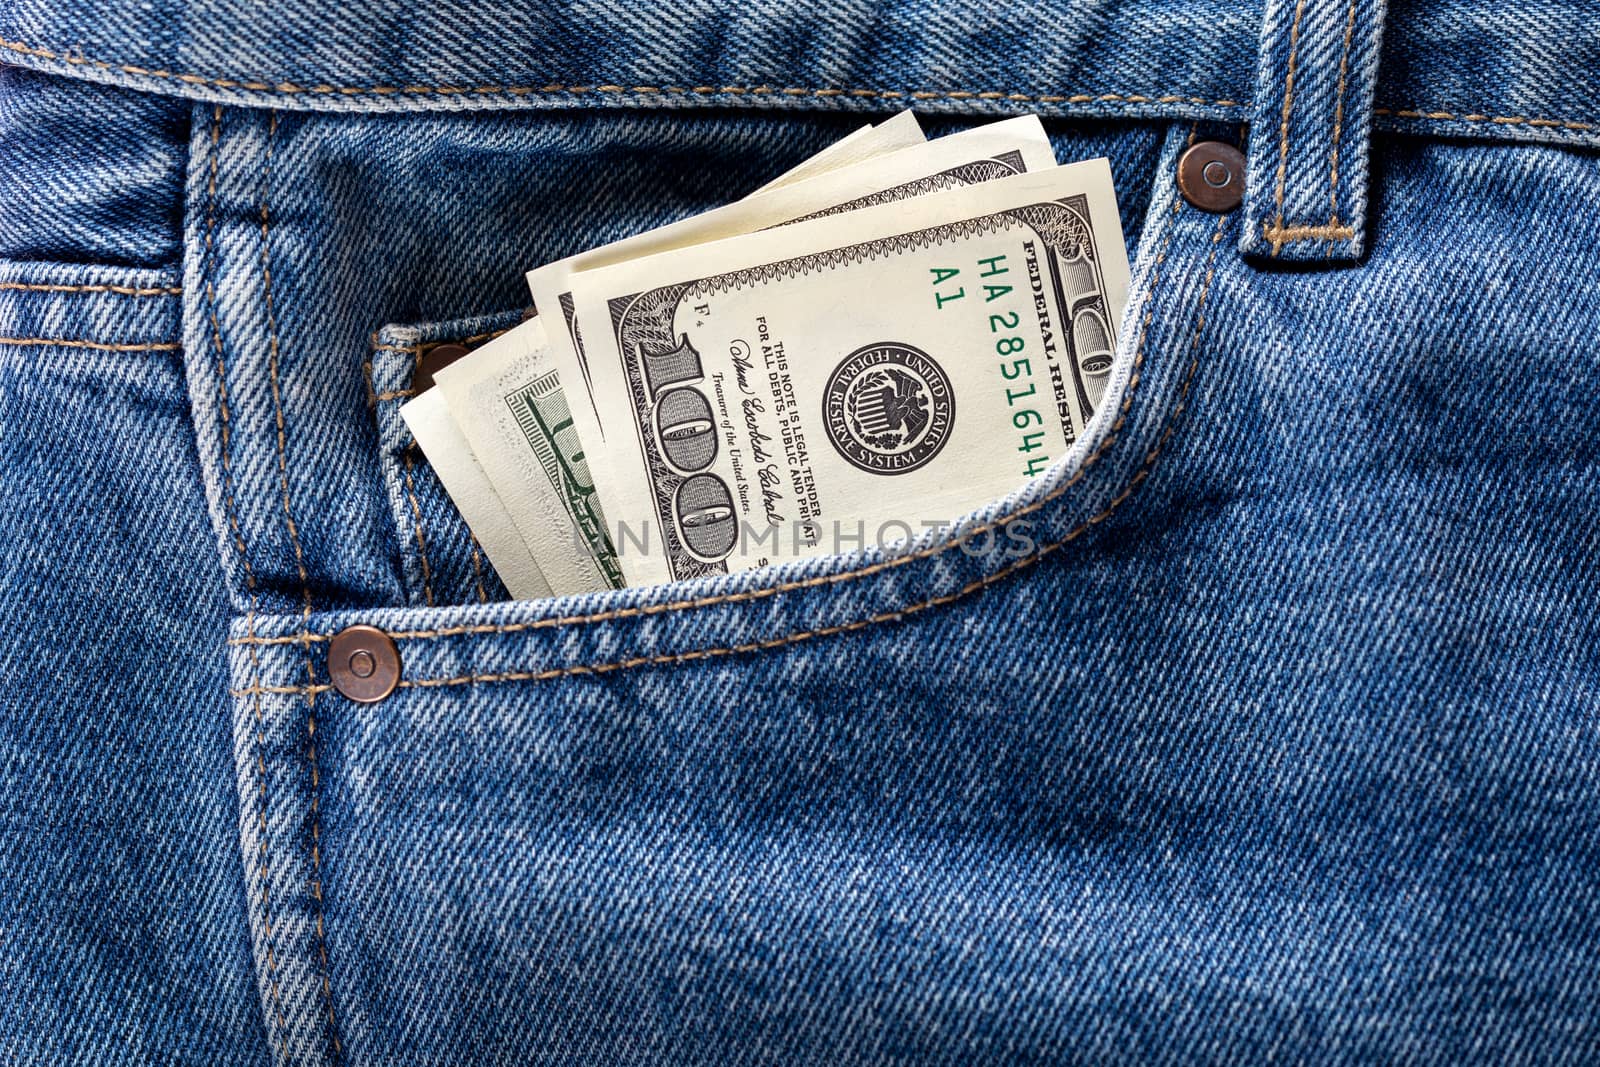 US dollar banknotes in the left front pocket of blue jeans. Concept of saving money or pocket expenses.